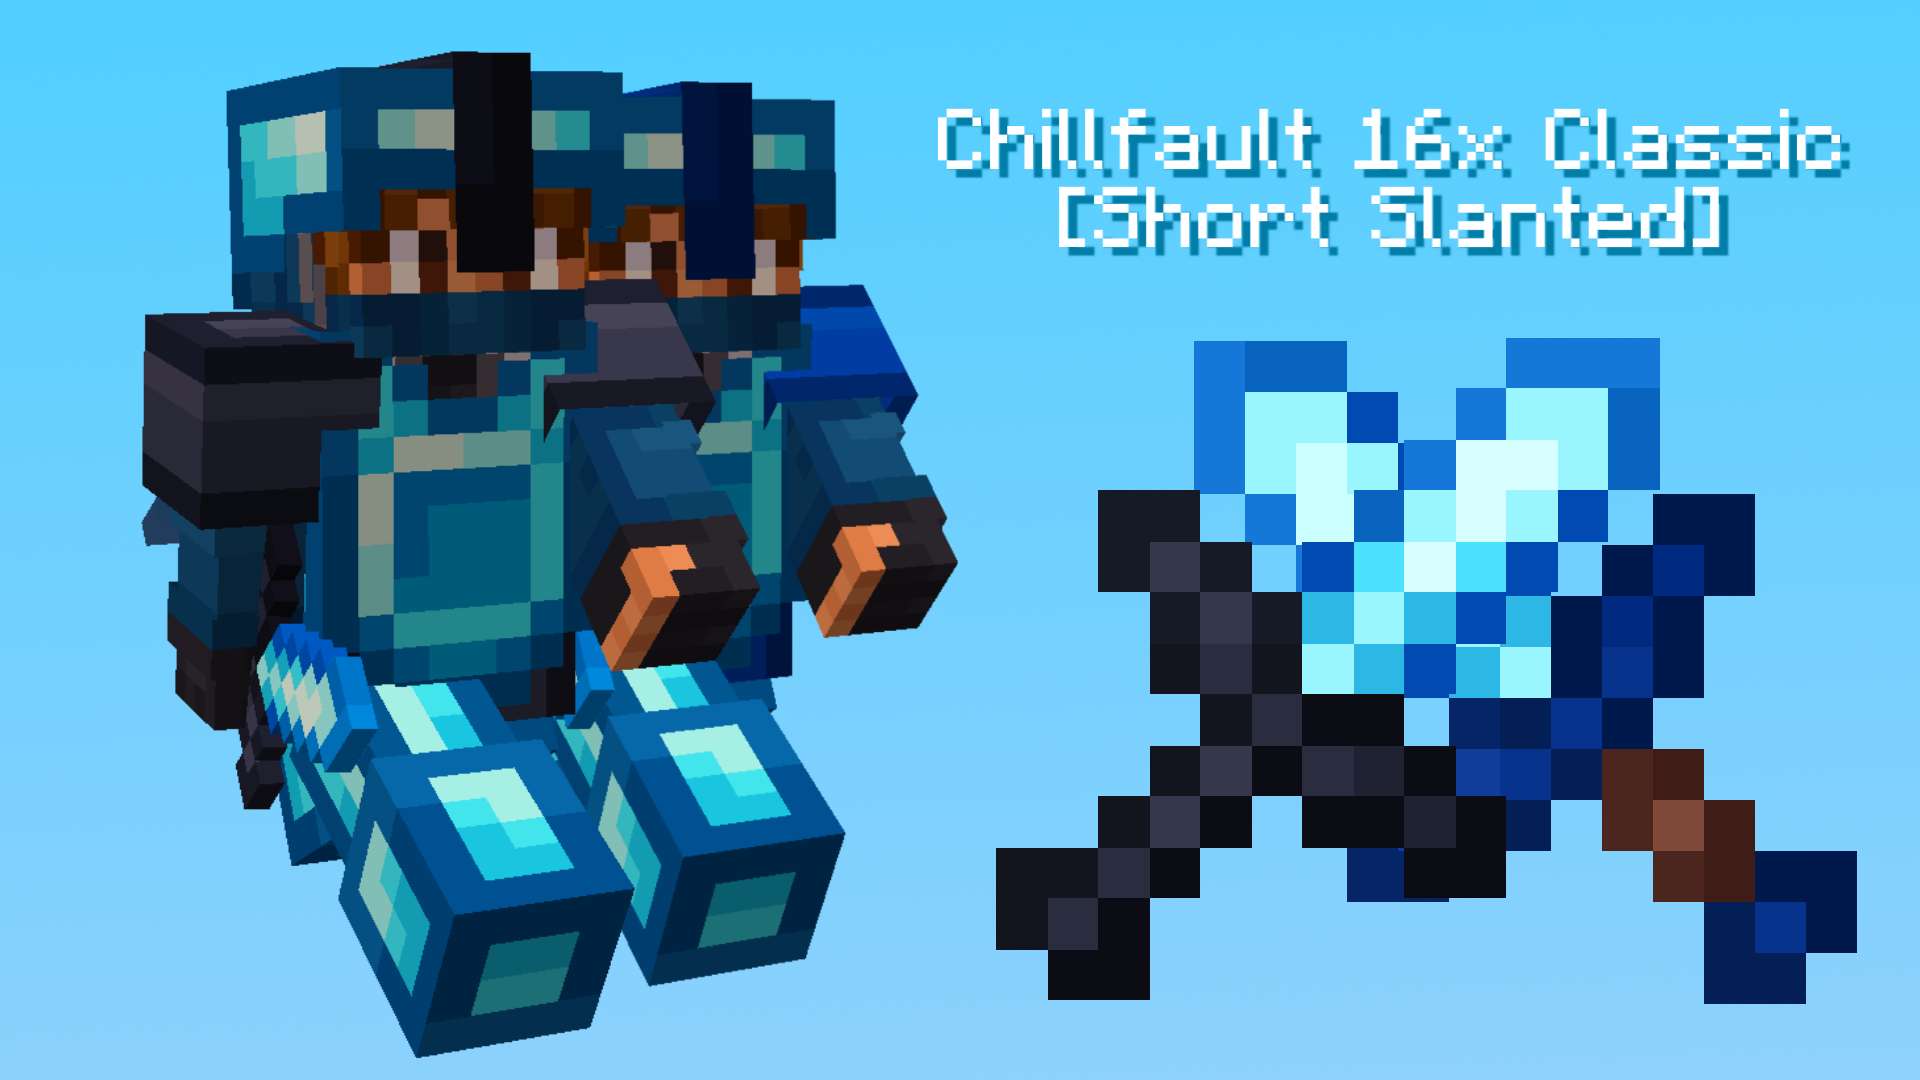 Chillfault 16x Classic [Short Slanted] 16 by Jes13 on PvPRP